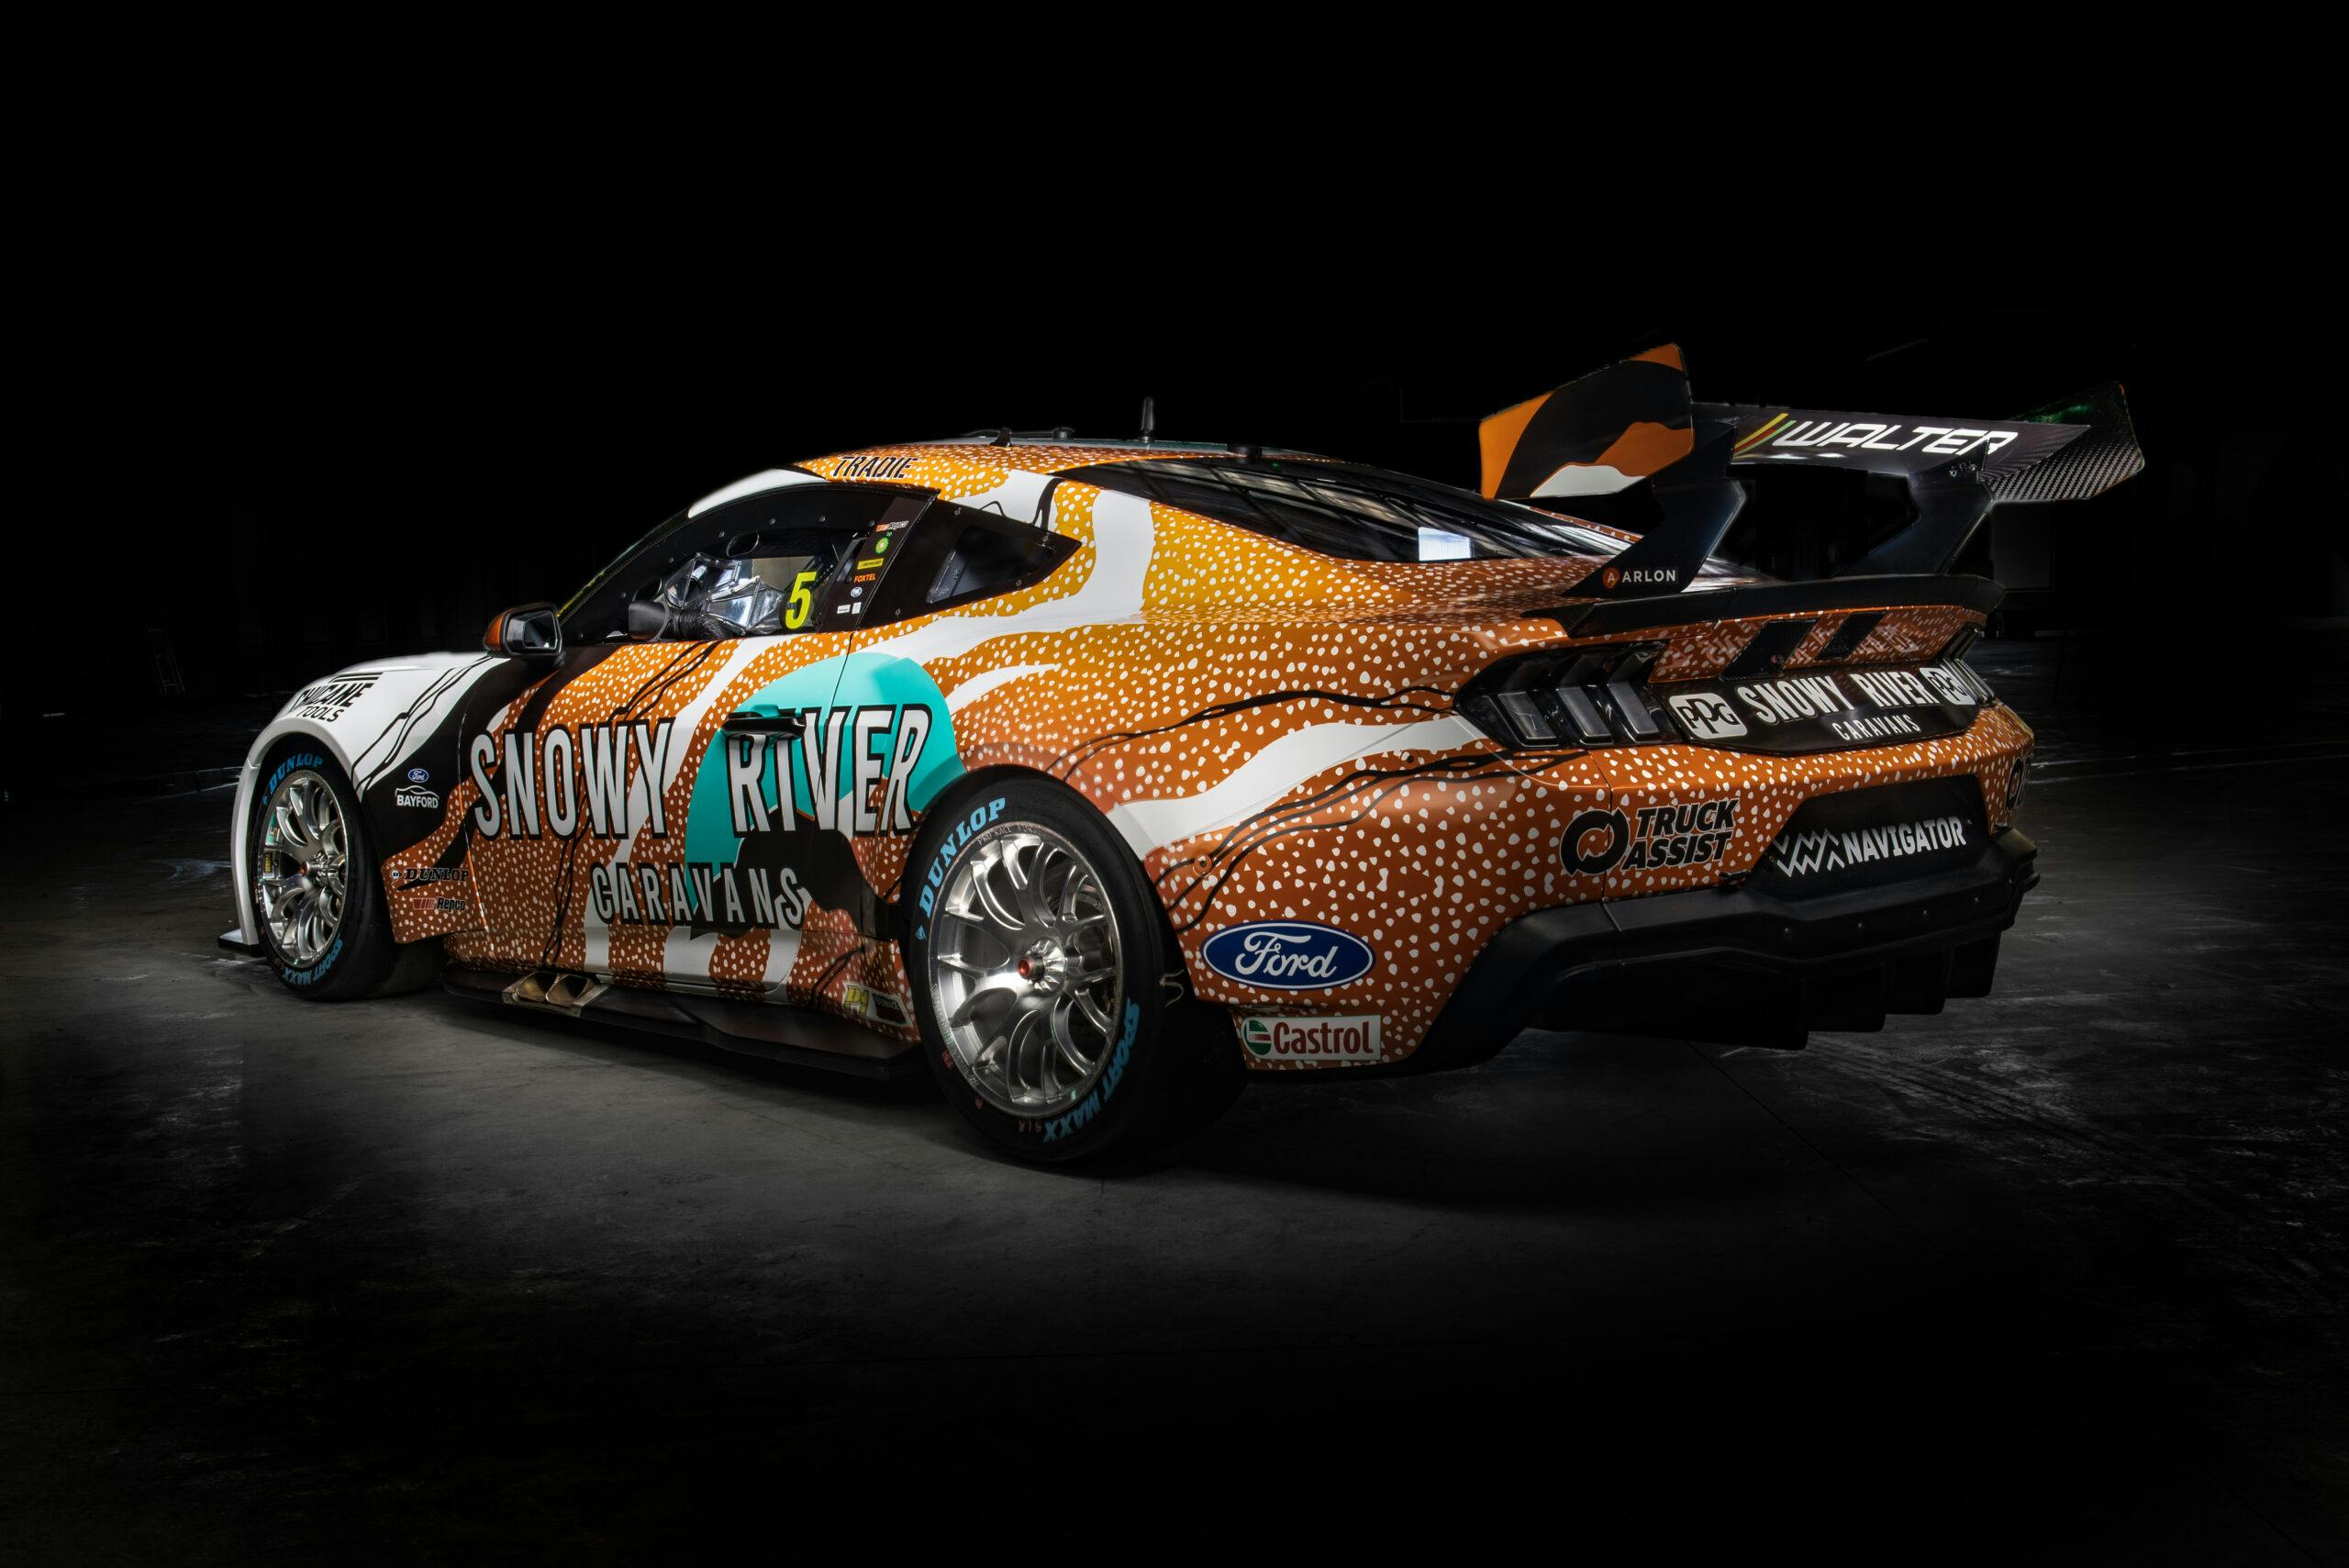 Indigenous artwork on the livery of Tickford Racing's car #5